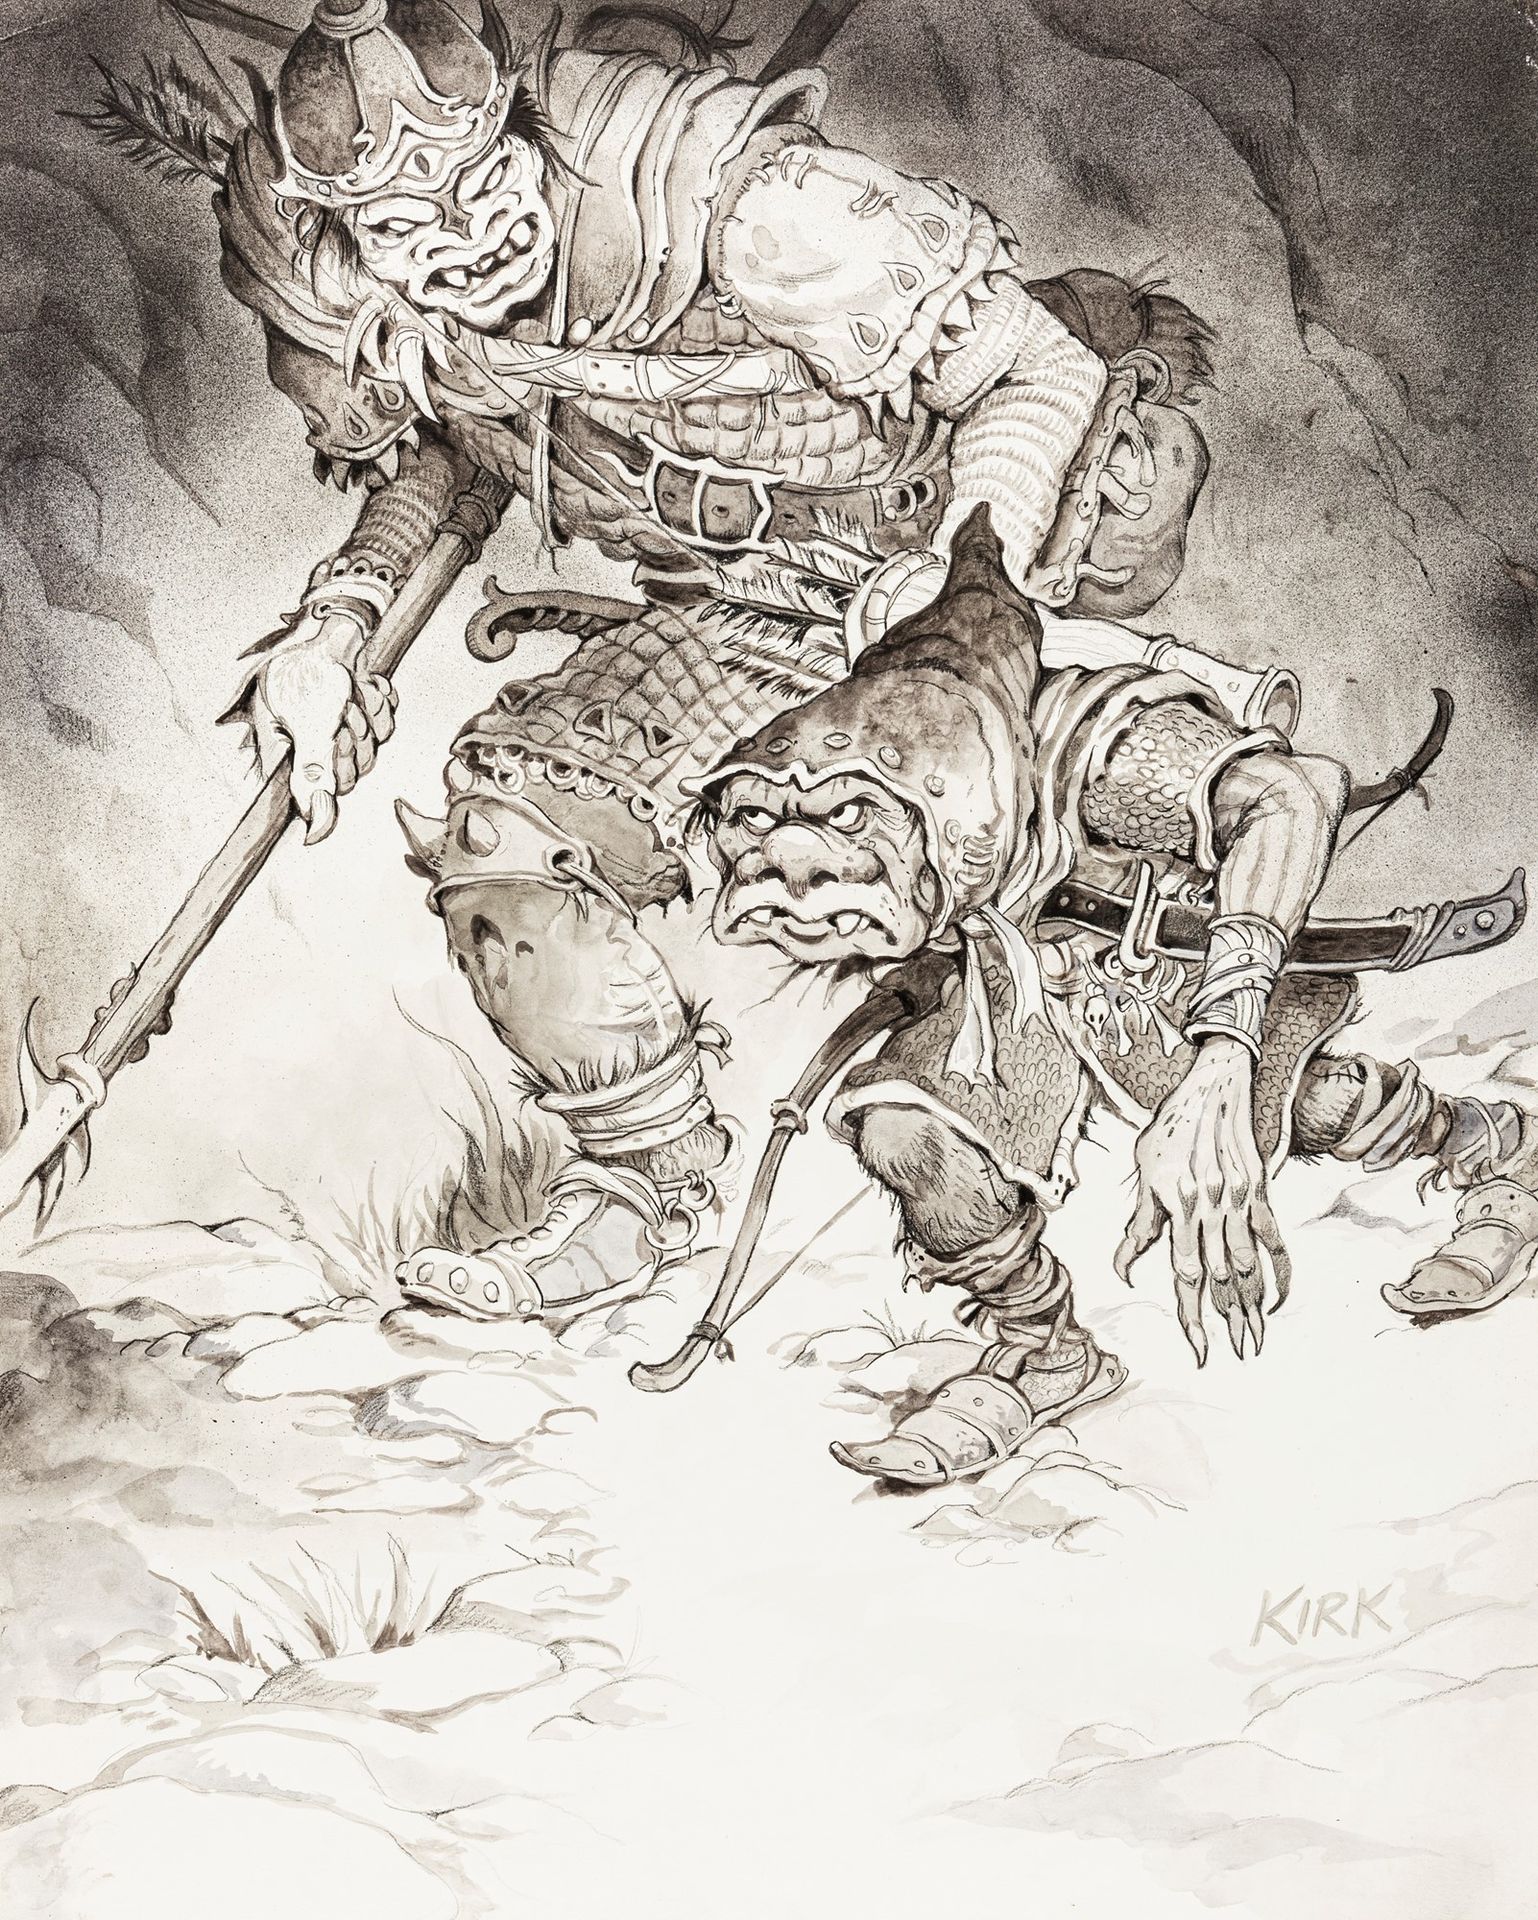 Tim Kirk Two Orcs, 2009

pencil, ink and watercolor on cardboard
48 x 60 cm
Recr&hellip;